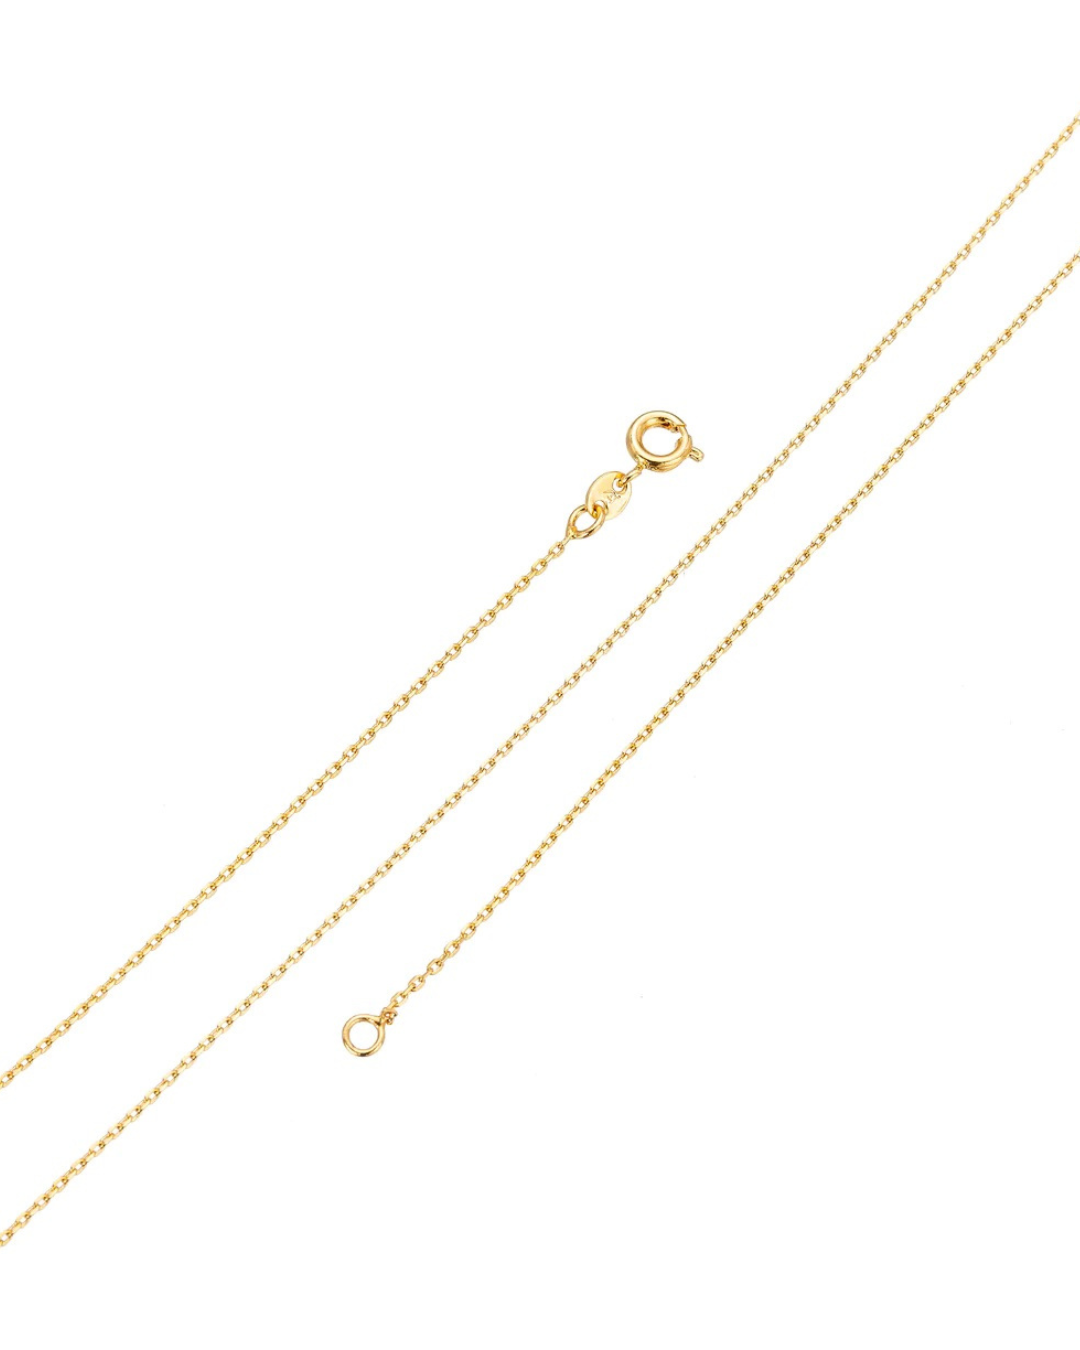 It's Especially Lucky - Chain Options for Charm Bar: Dainty link chain - Sienna Sky Boutique